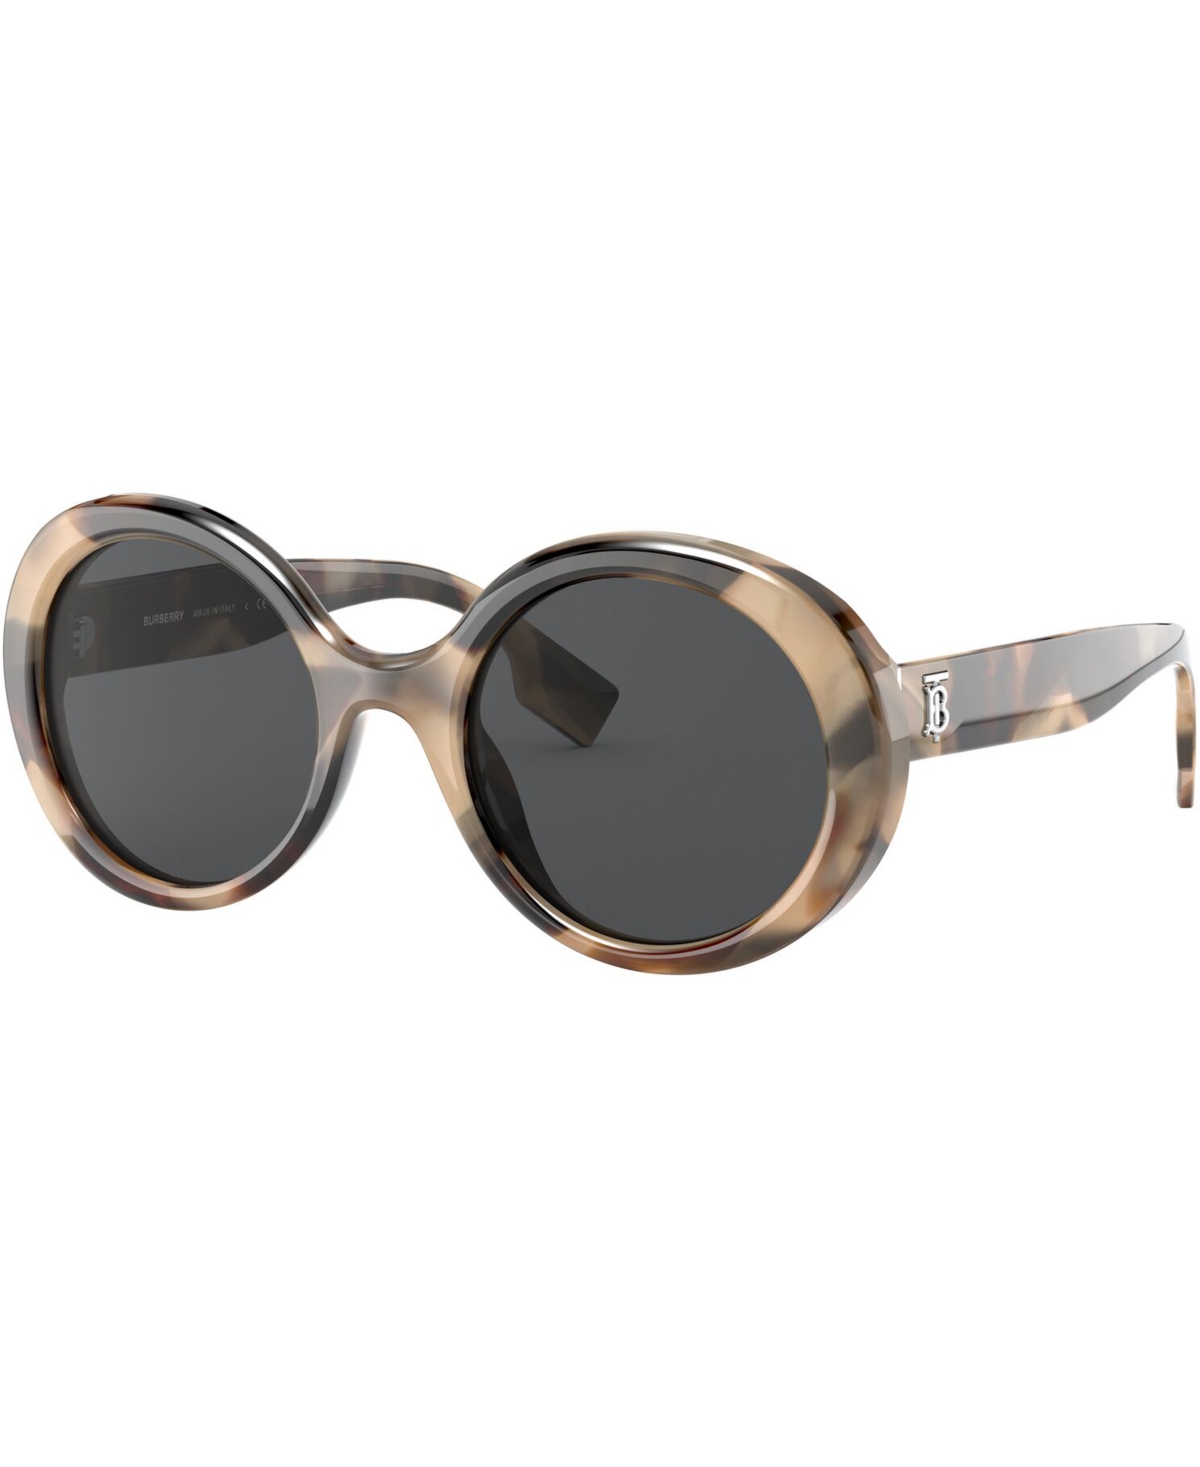 Burberry Sunglasses, 0be4314 In Spotted Horn,grey